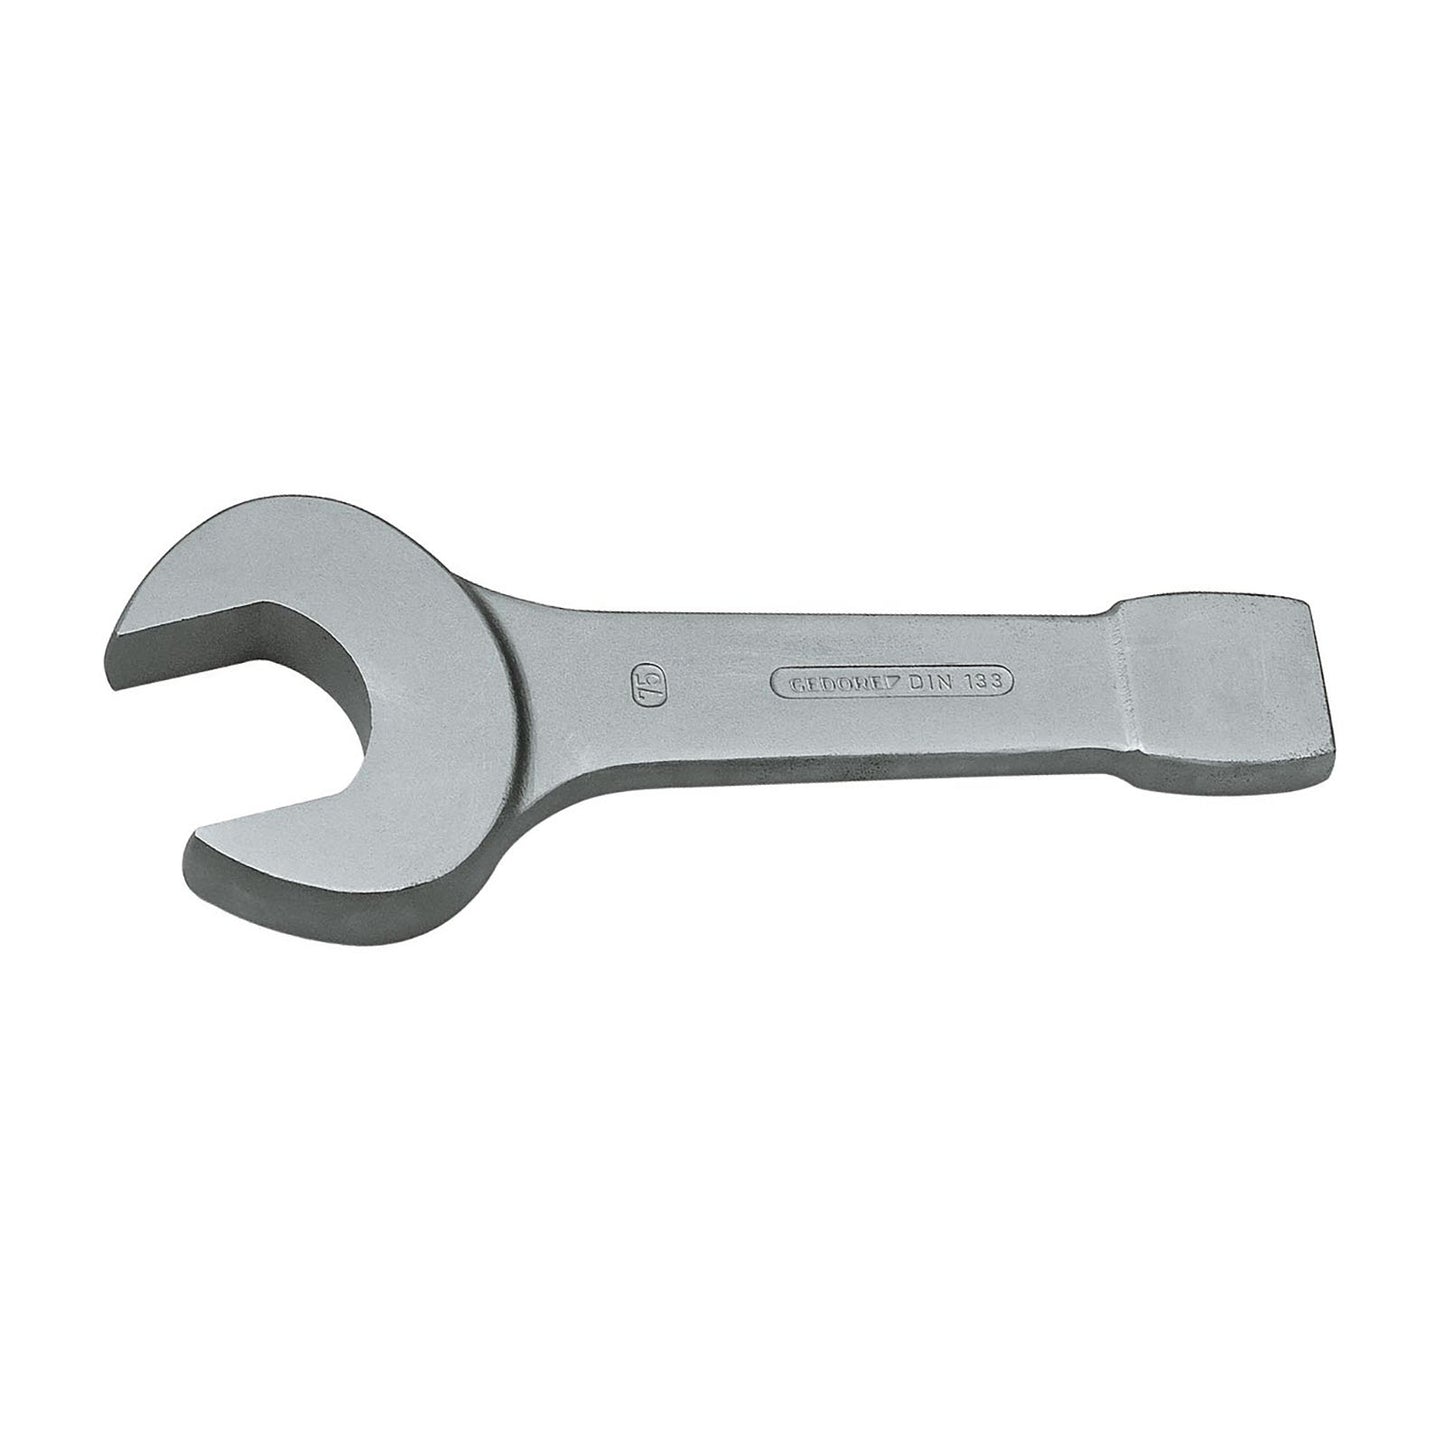 GEDORE 133 110 - Open Strike Wrench, 110mm (6402040)